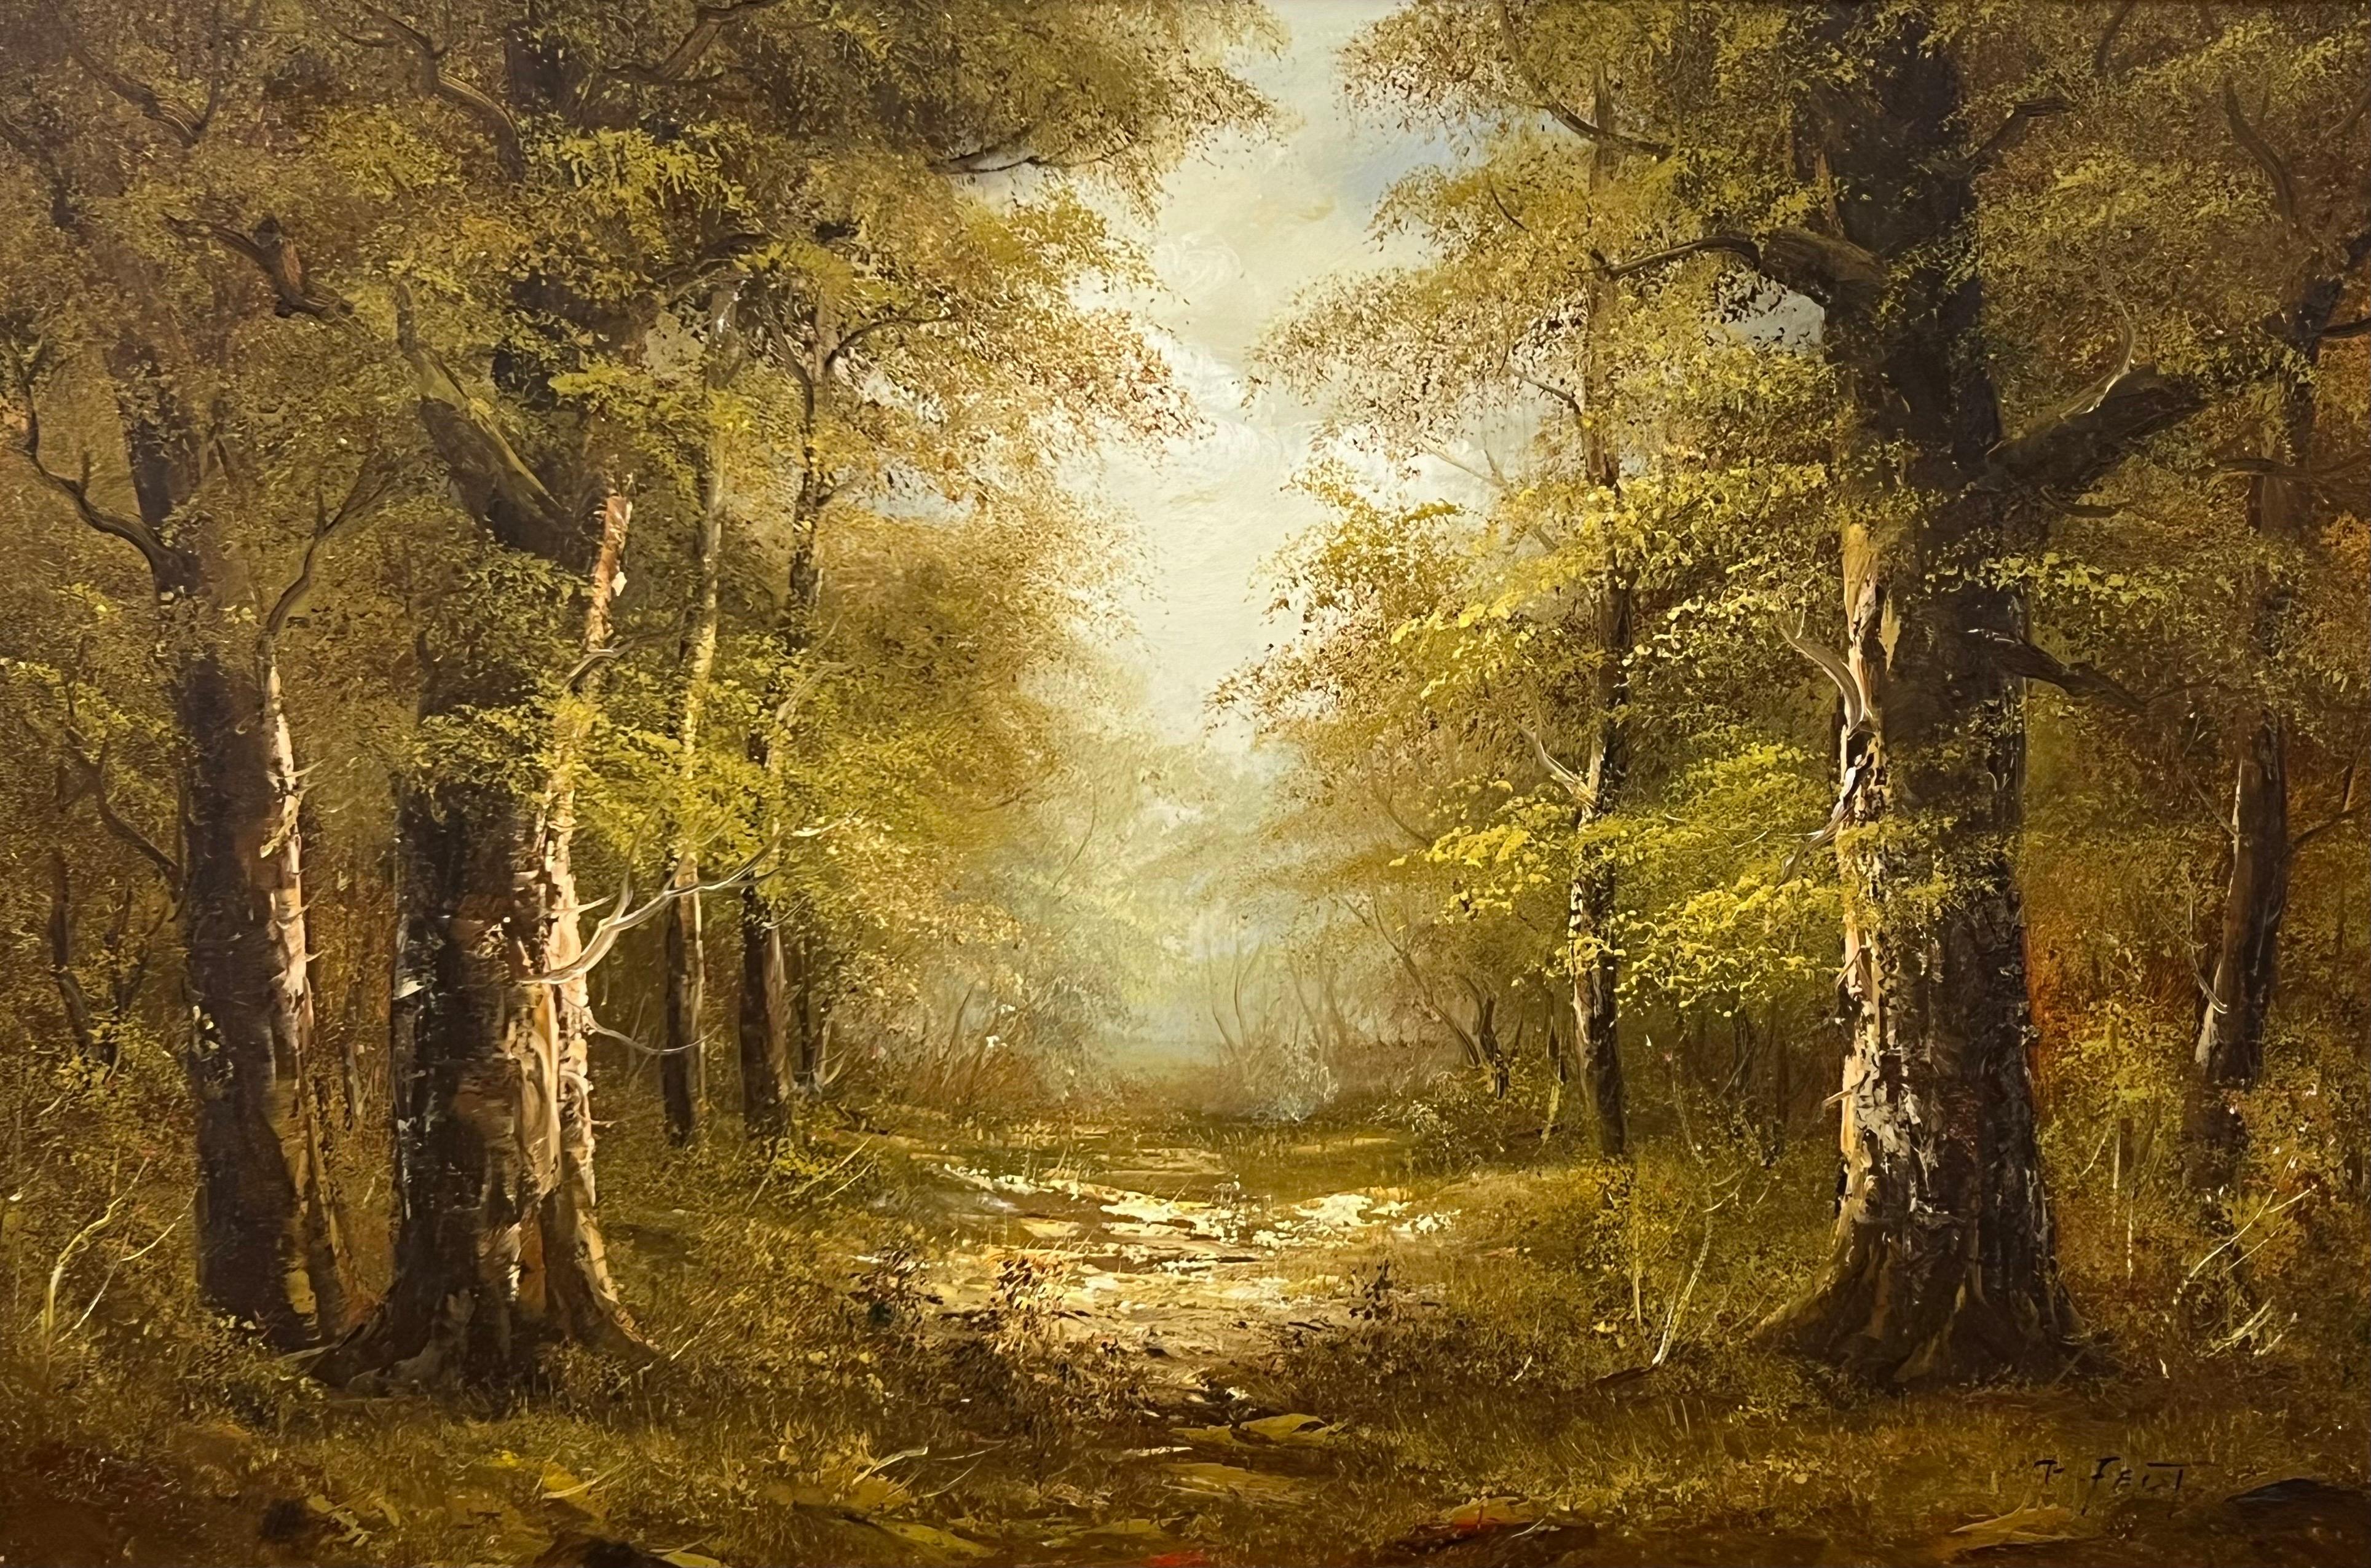 Atmospheric Impressionistic Painting of a Dense Forest in European Woodland. A skilfully painted depiction of a clearing in the trees, with light cascading through towards a path in the wood. 

Art measures 36 x 24 inches 
Frame measures 42 x 30